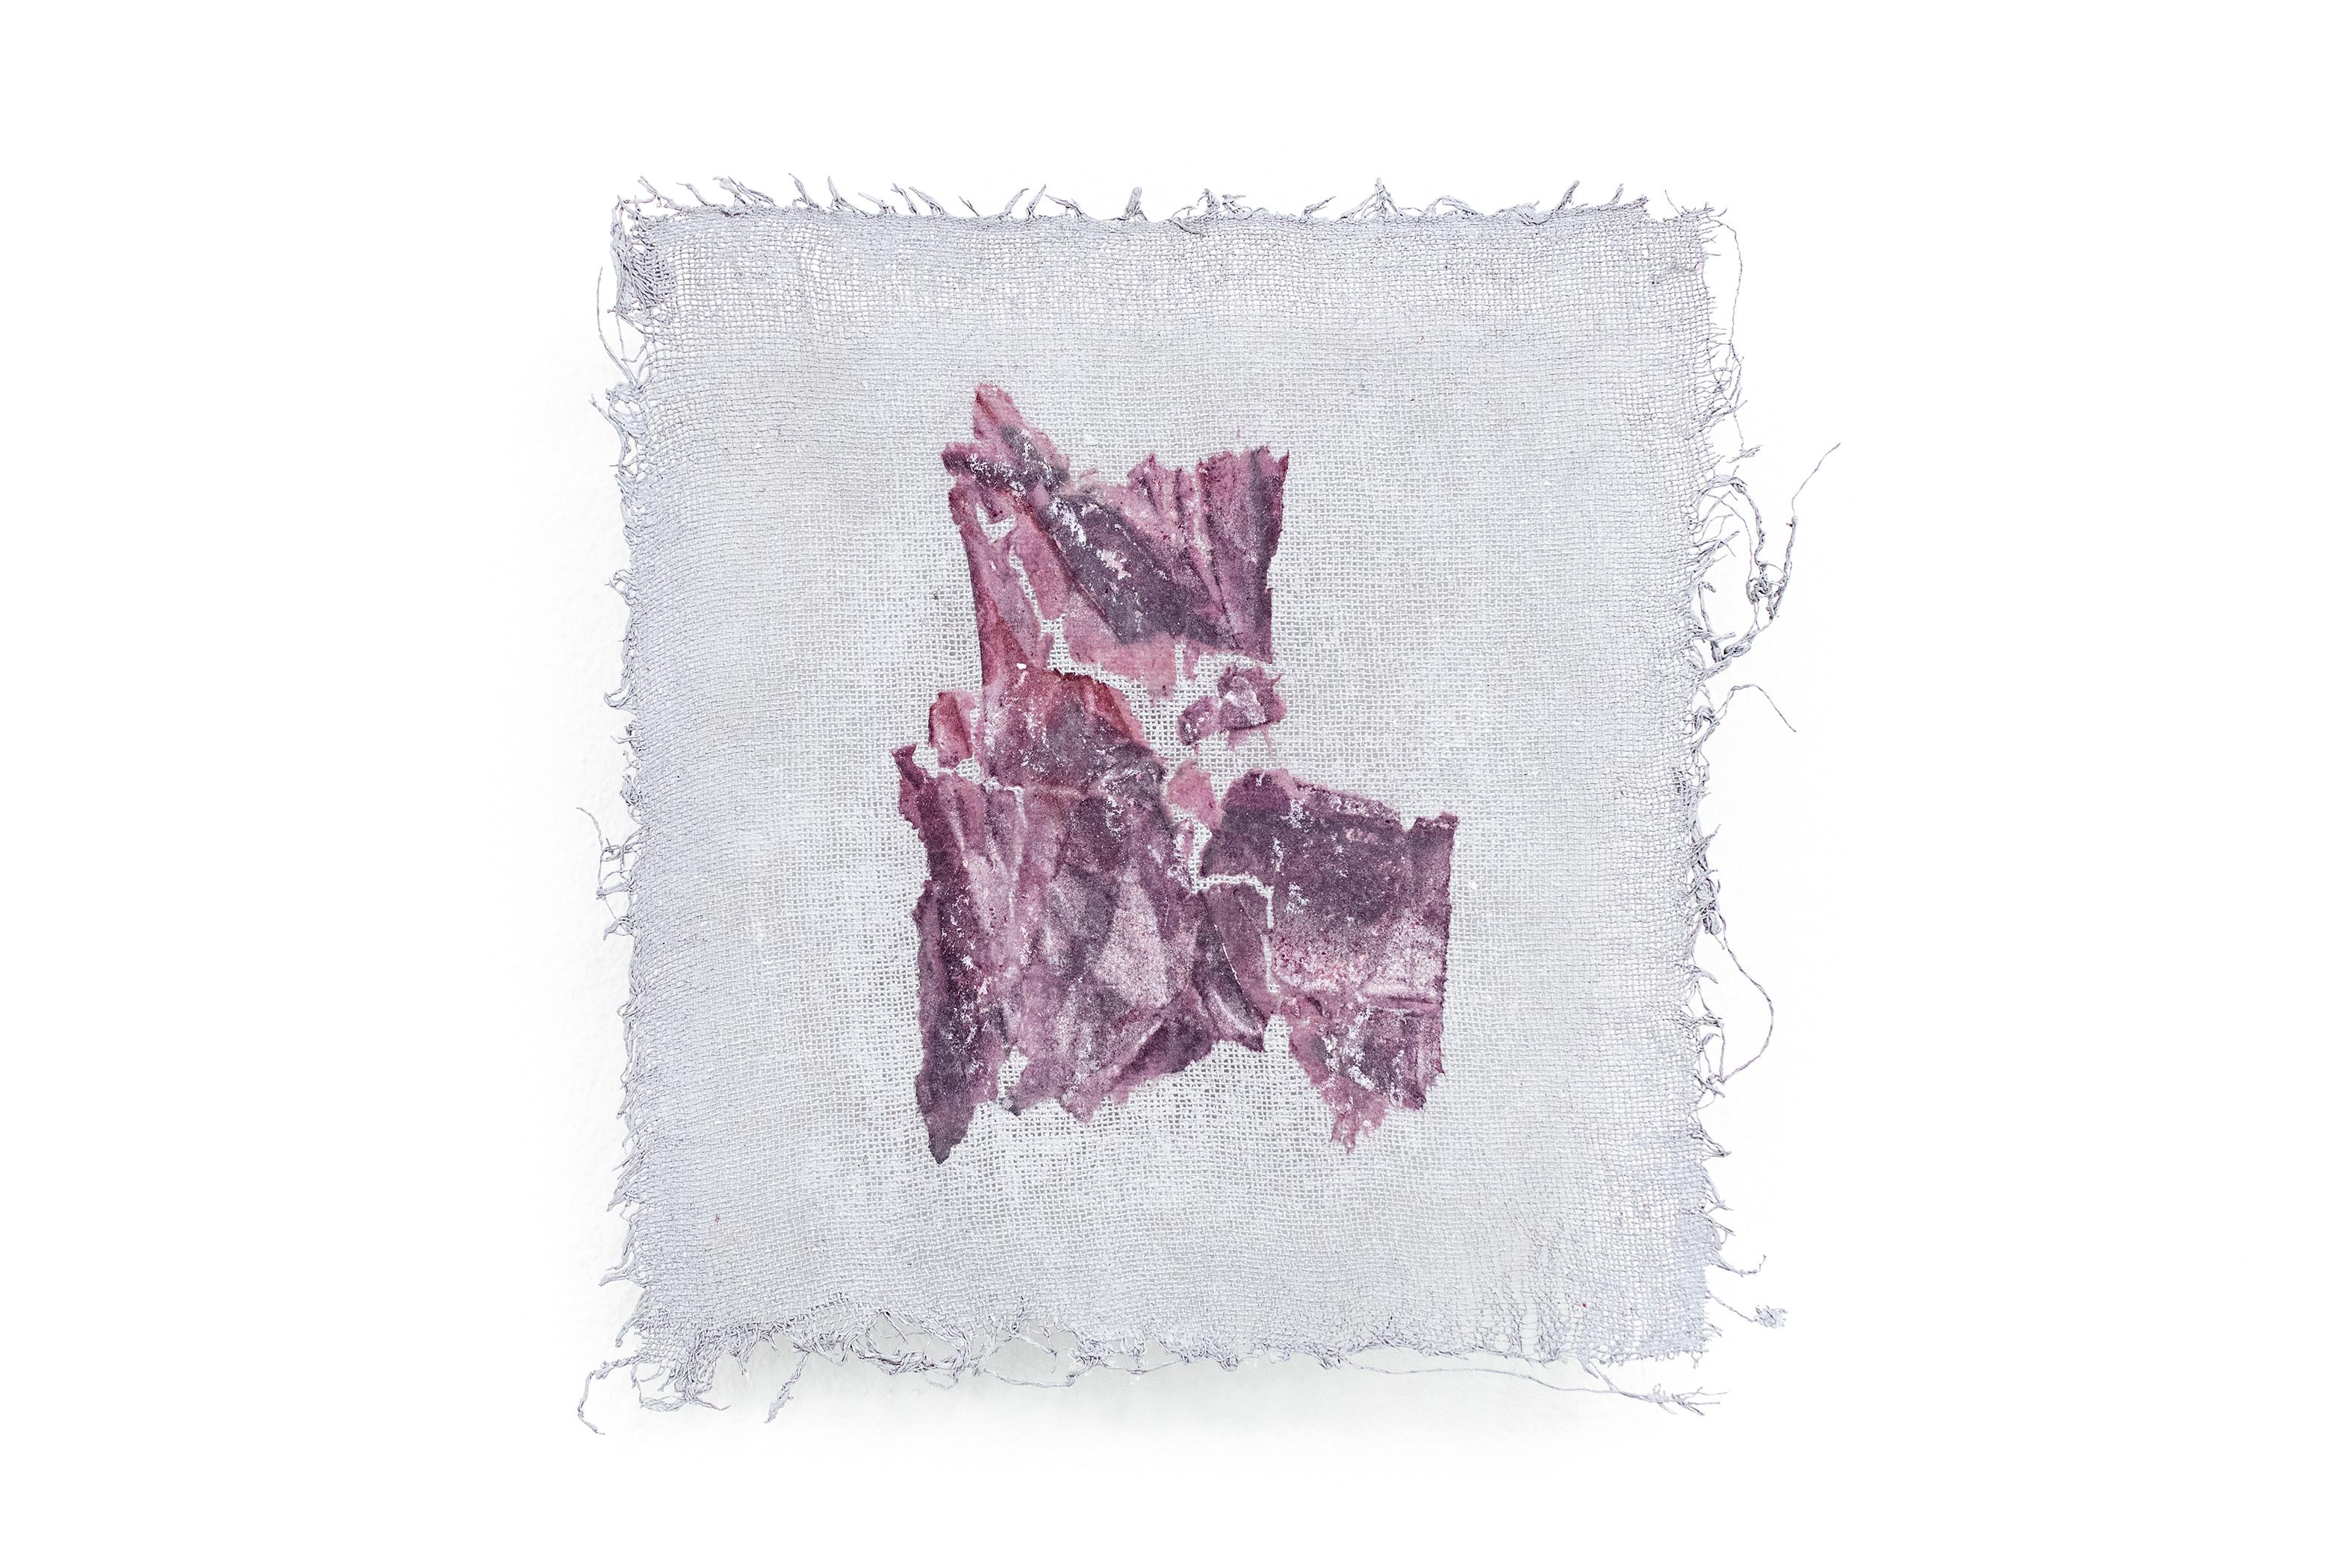 Tooth, Mulberry paper and acrylic on gauze - Painting by Xinyi Liu